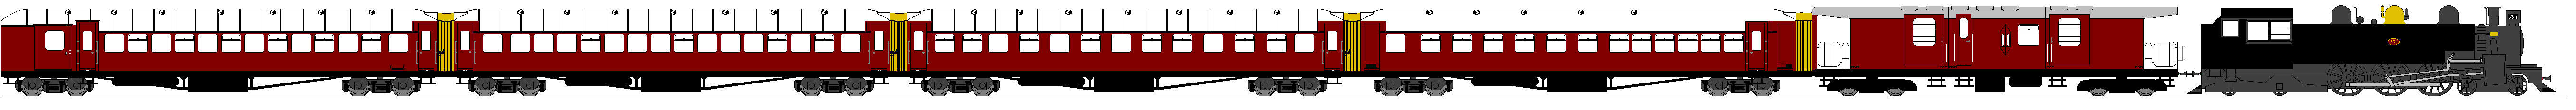 Wab794 and Carriages Cartoon